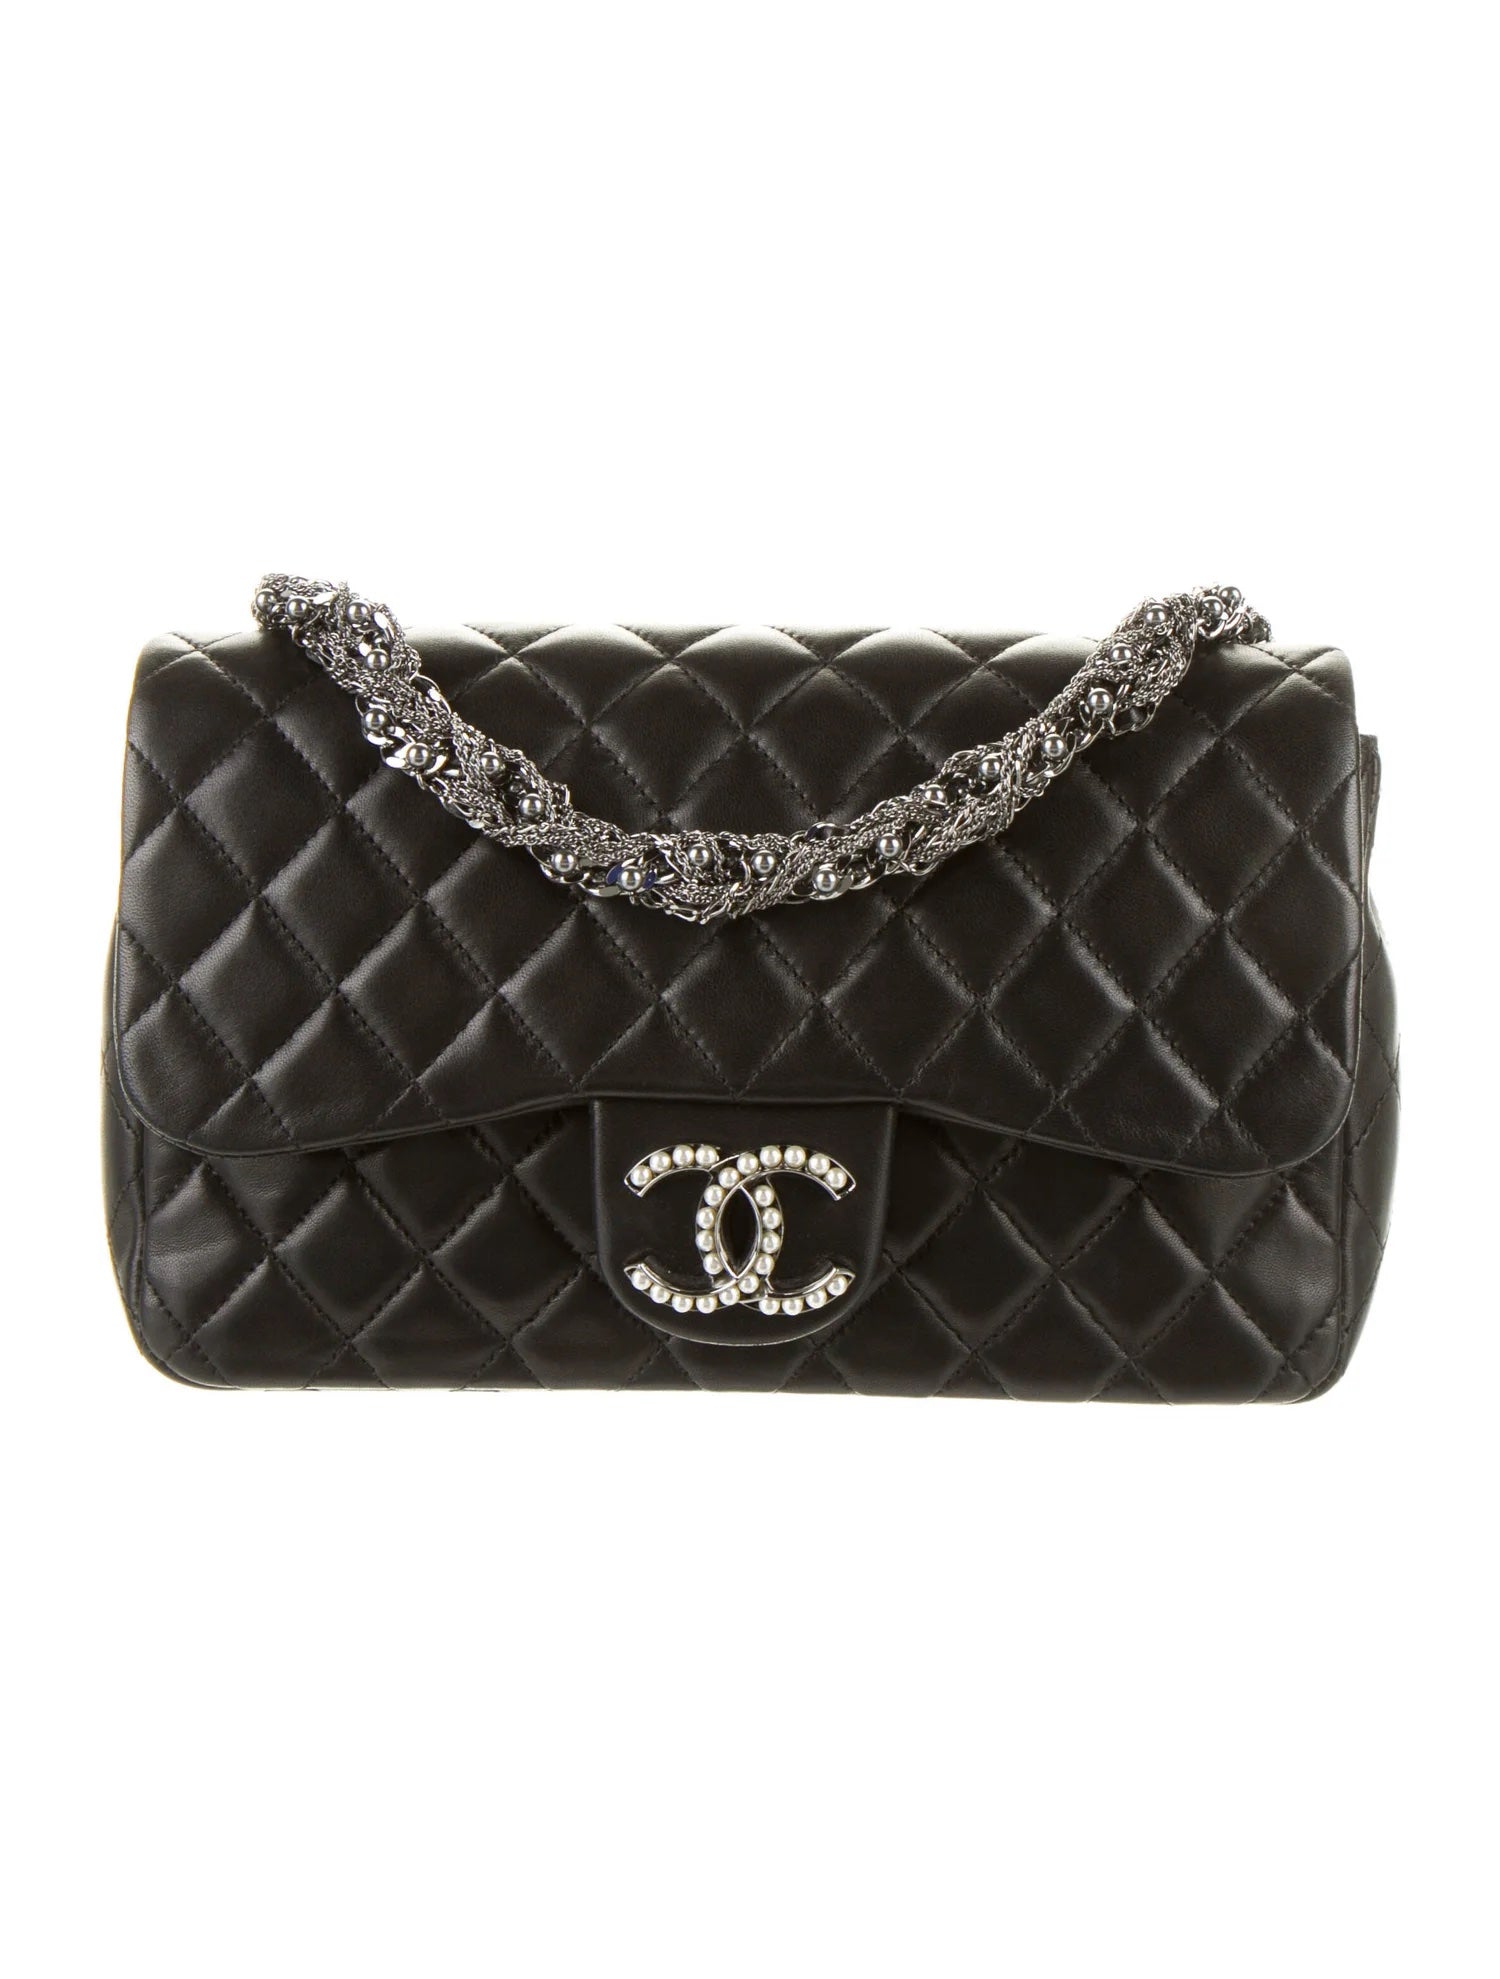 Chanel Limited Fantasy Pearls Quilted Flap Bag Black Lambskin